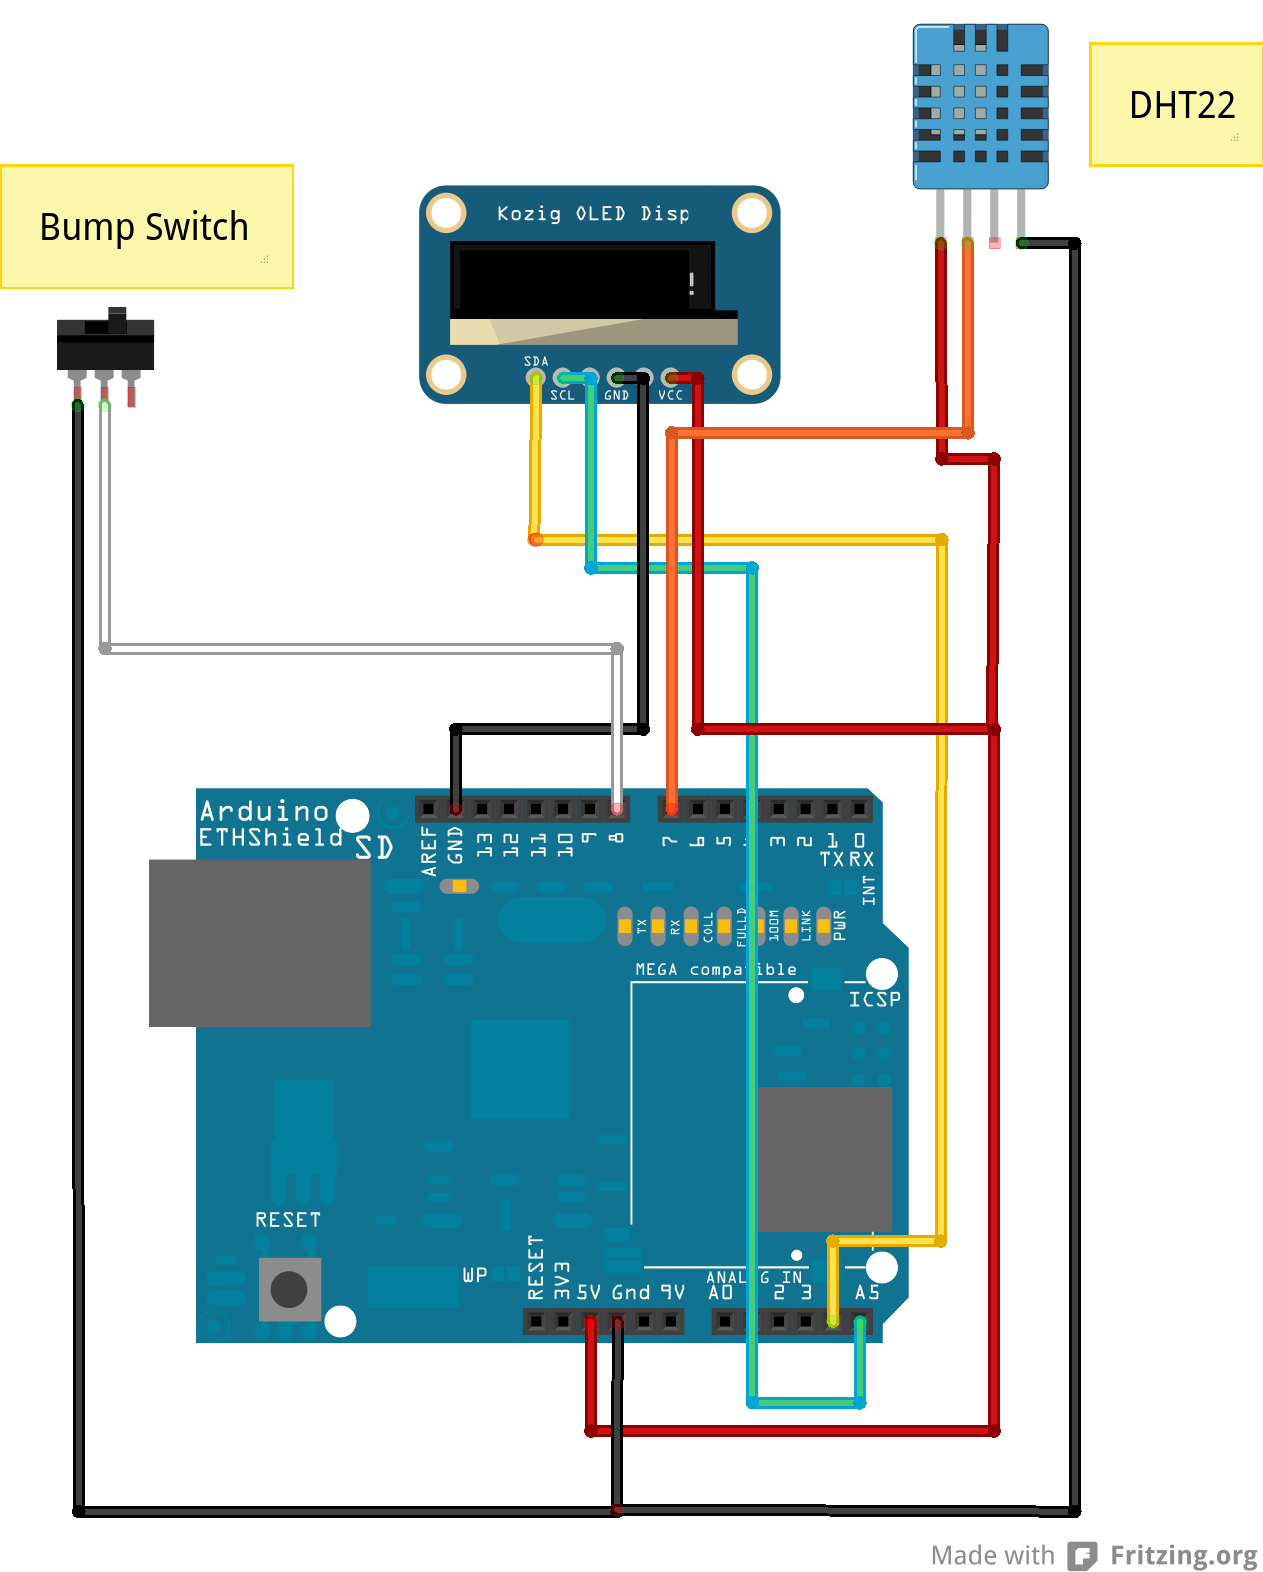 Wire OLED display, Bump Switch & DHT22 to the arduino